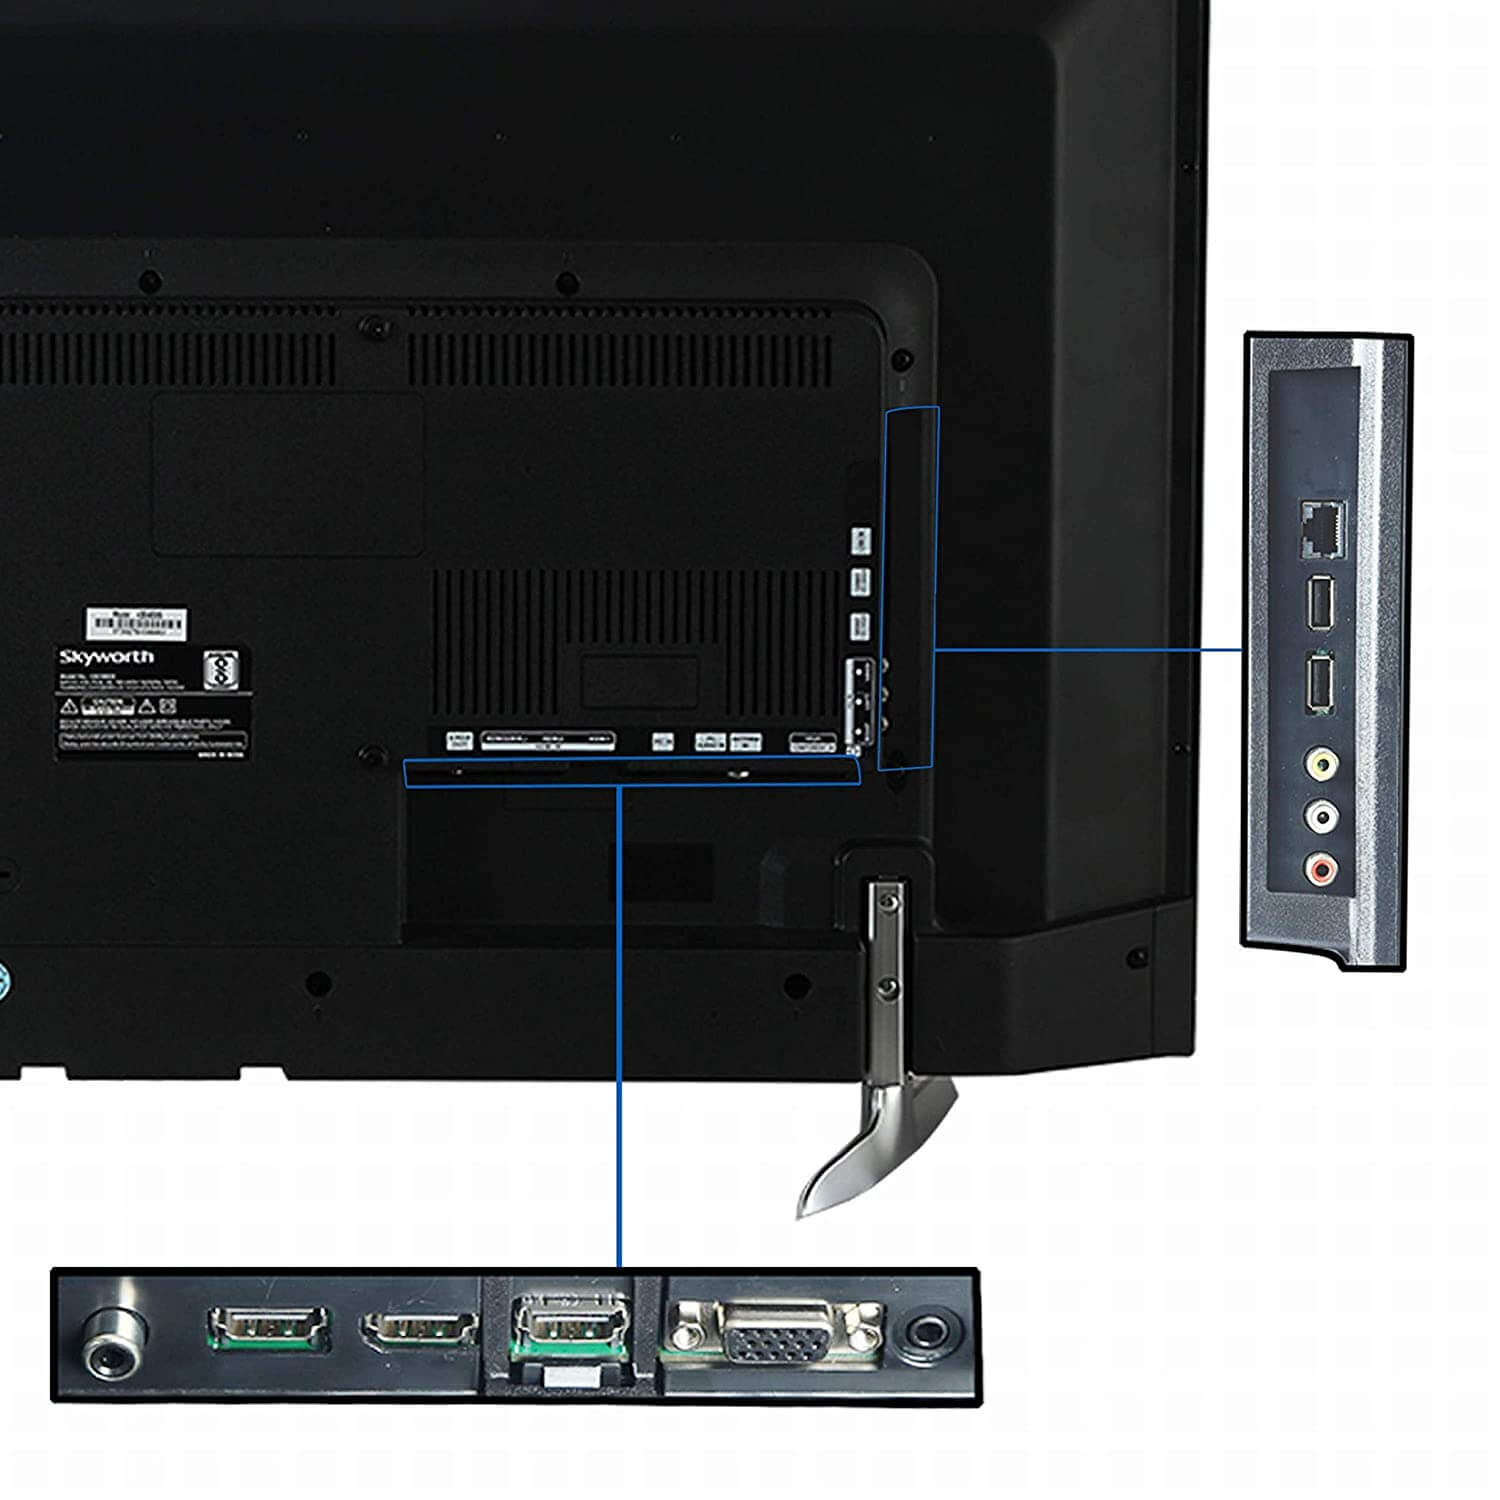 Connect Skyworth TV to the Internet using Ethernet Cable